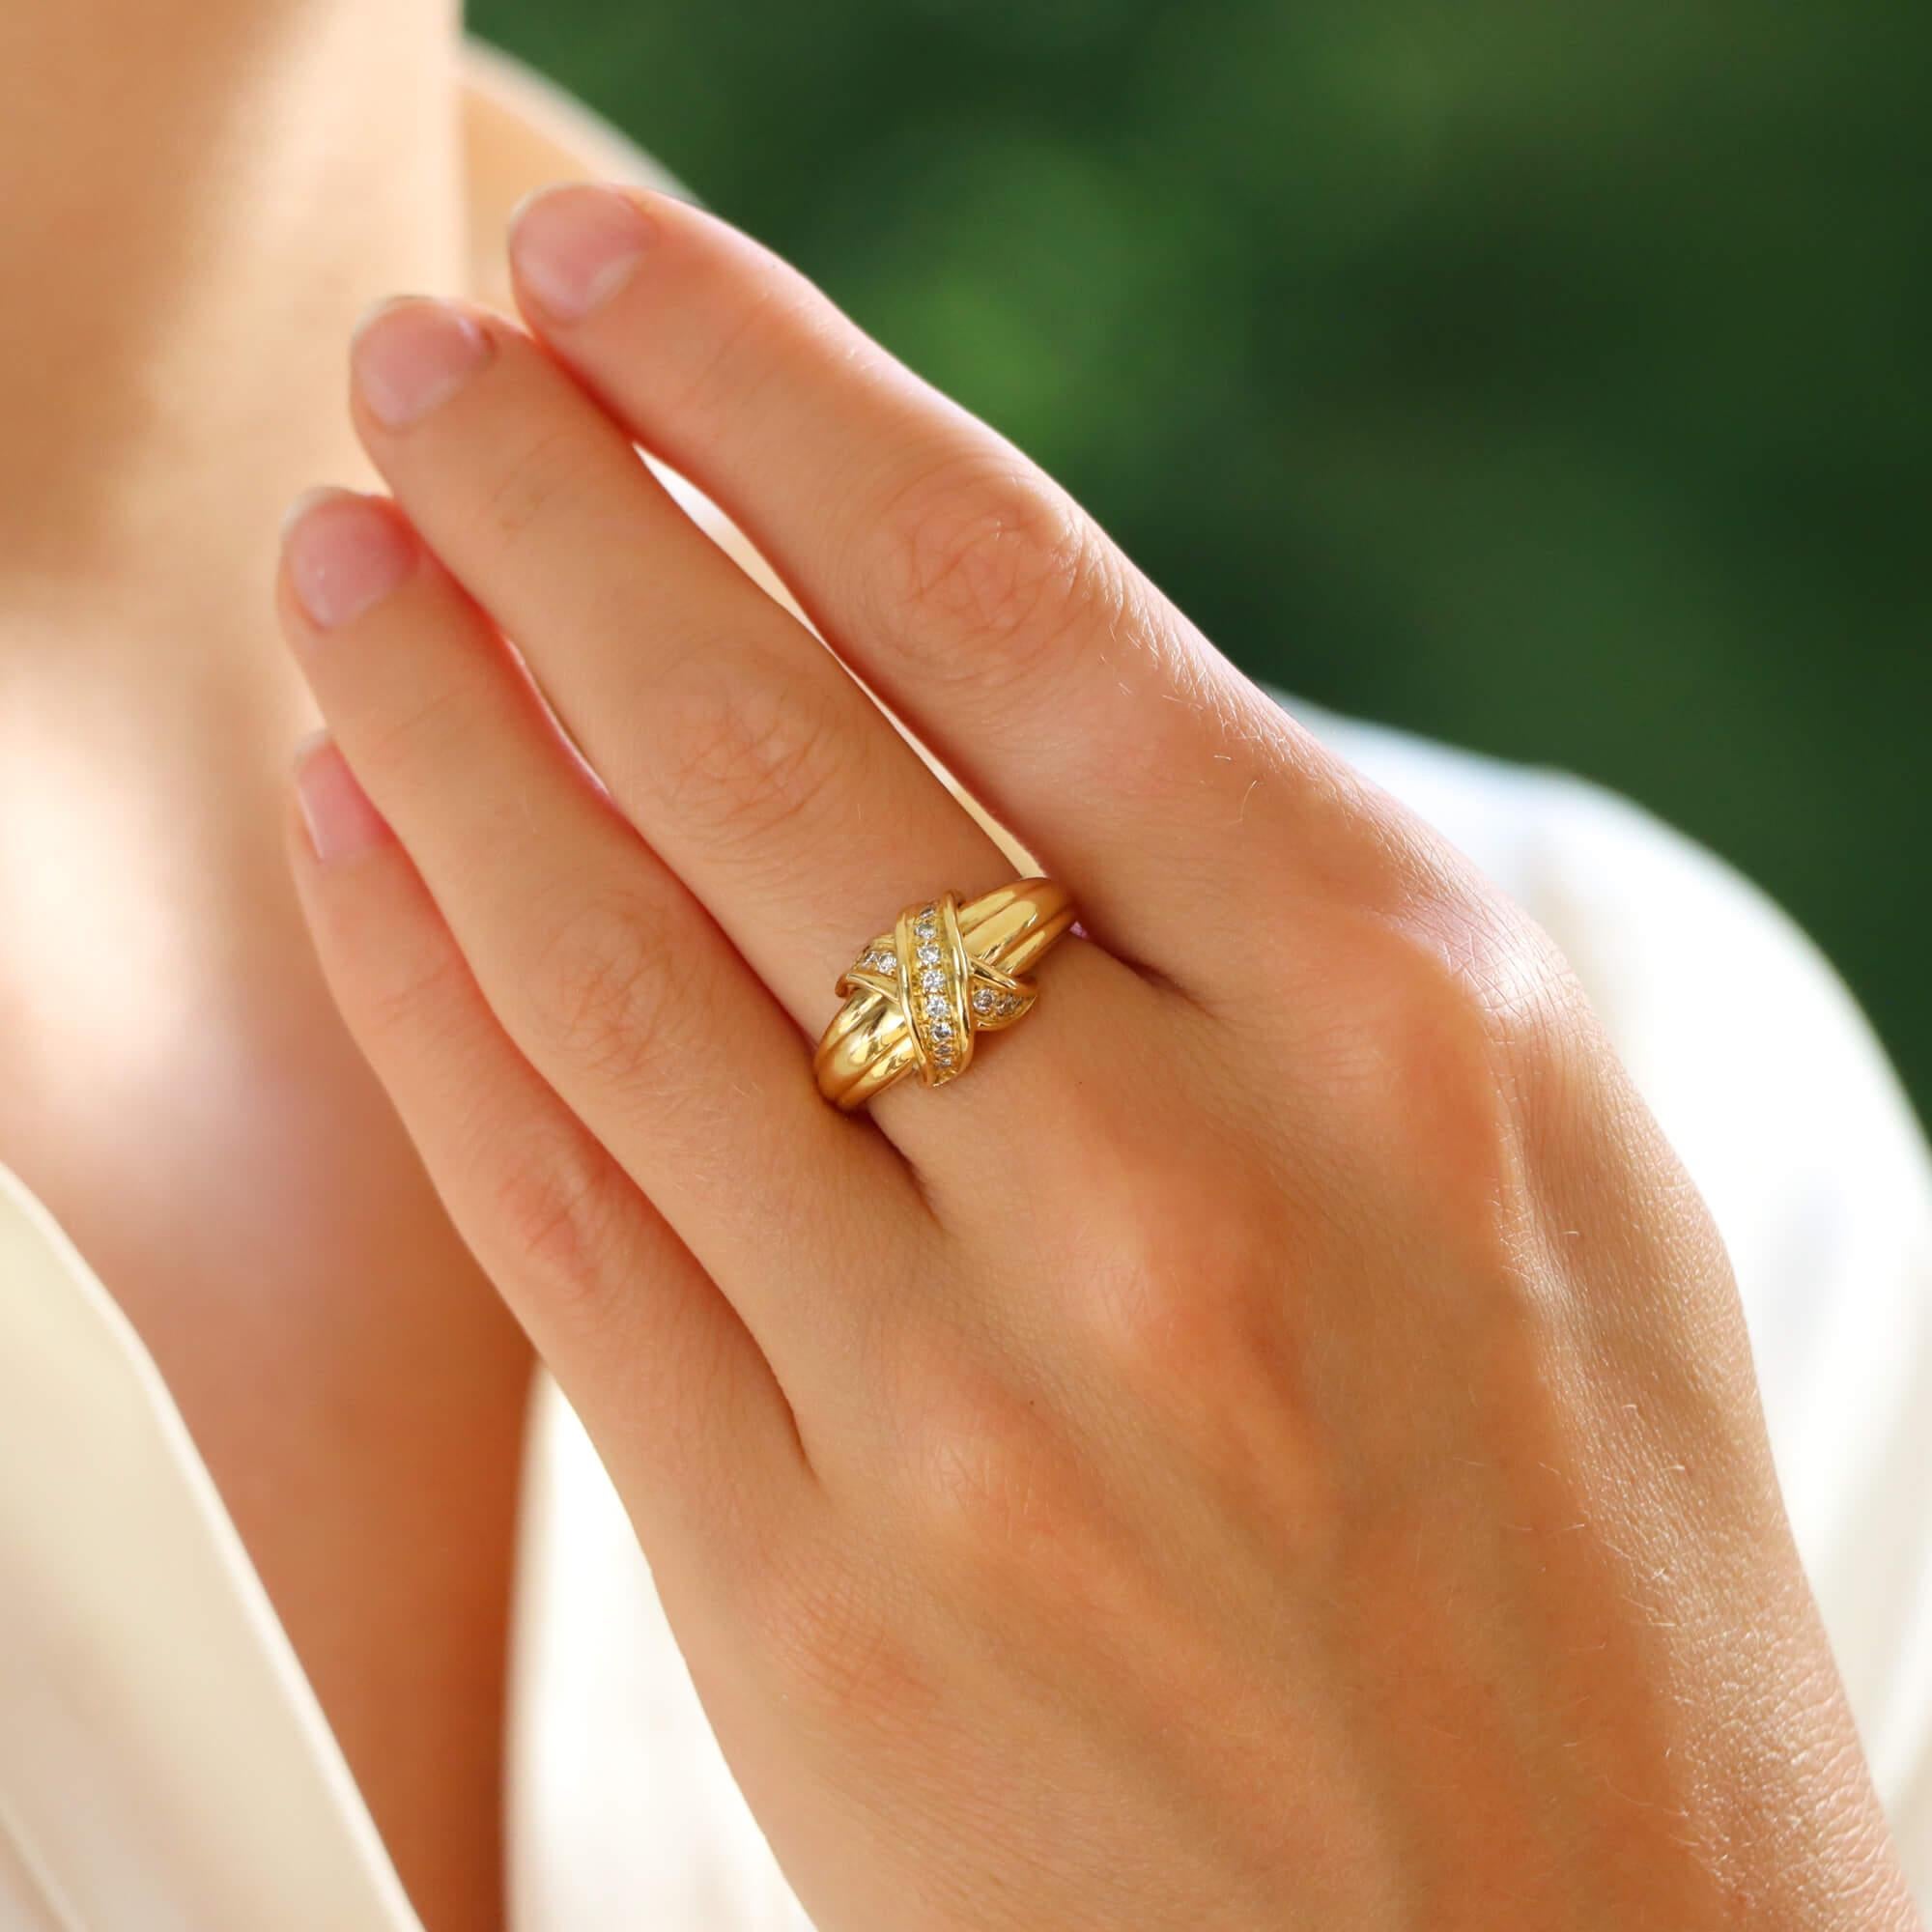 A beautiful vintage Tiffany & Co. signature cross ring in 18k yellow gold.

The ring predominantly features the iconic Tiffany cross motif, set on top of fluted banded shoulders. The cross is pave set throughout with round brilliant cut diamonds.